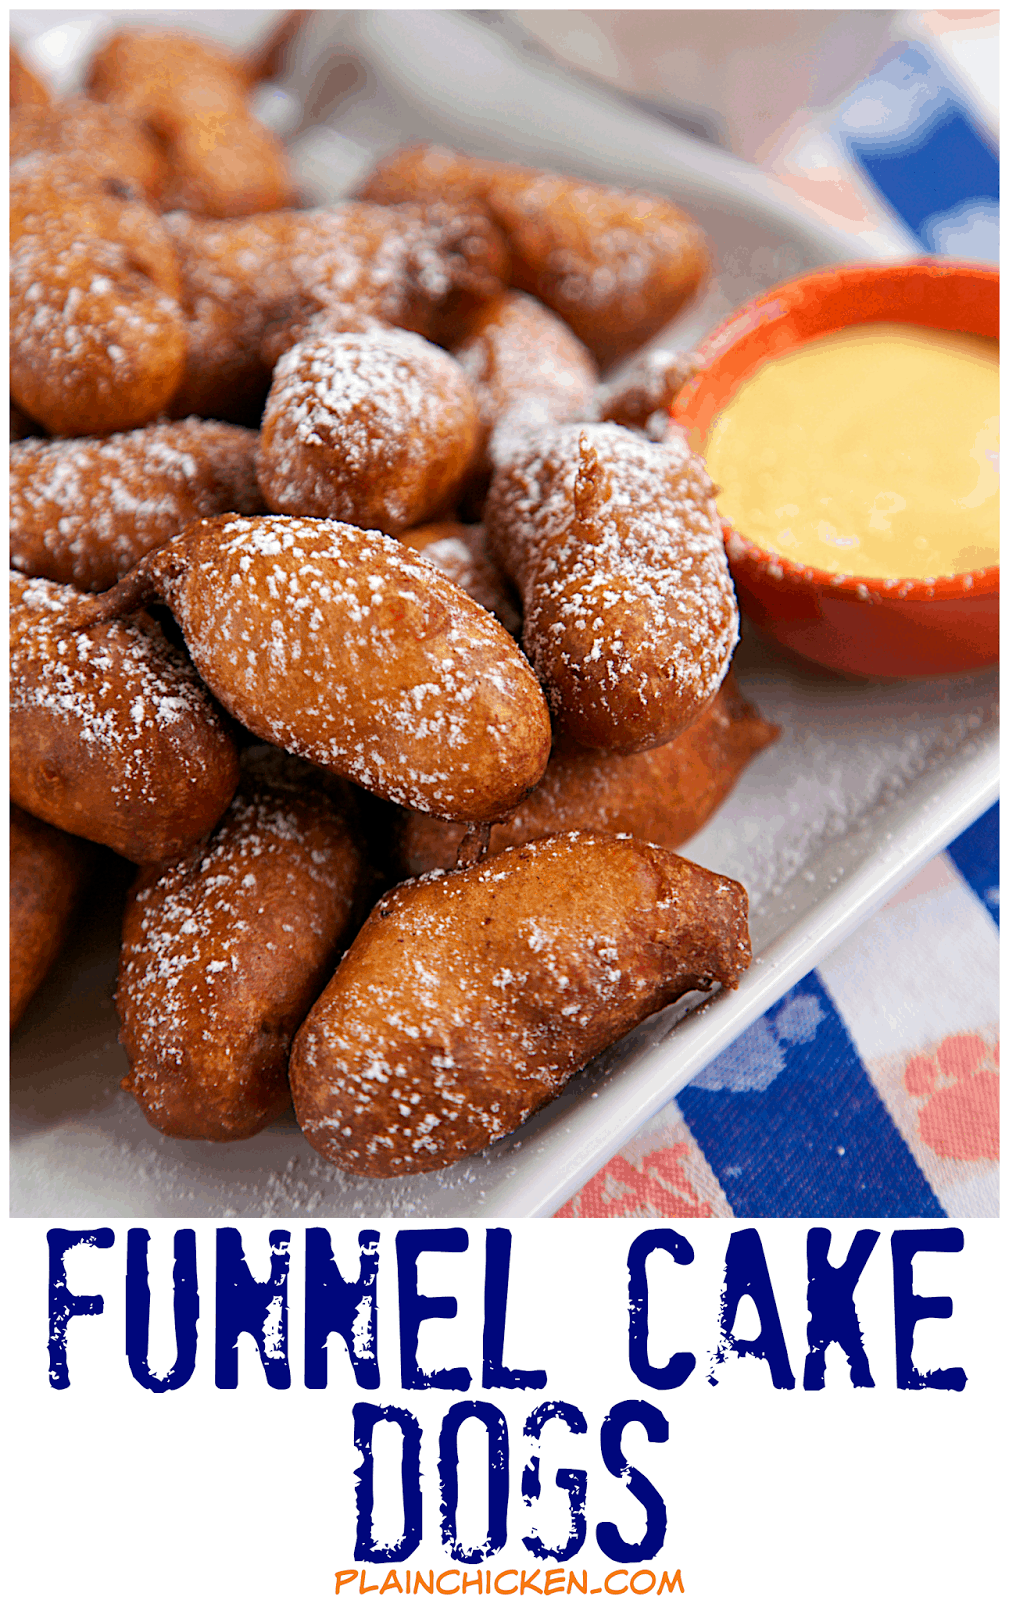 Funnel Cake Dogs Recipe - great for tailgating!! Little Smokies battered and fried. Dip in honey mustard or plain honey. Fun twist on our usual pigs in a blanket. Great party food and tailgating food!